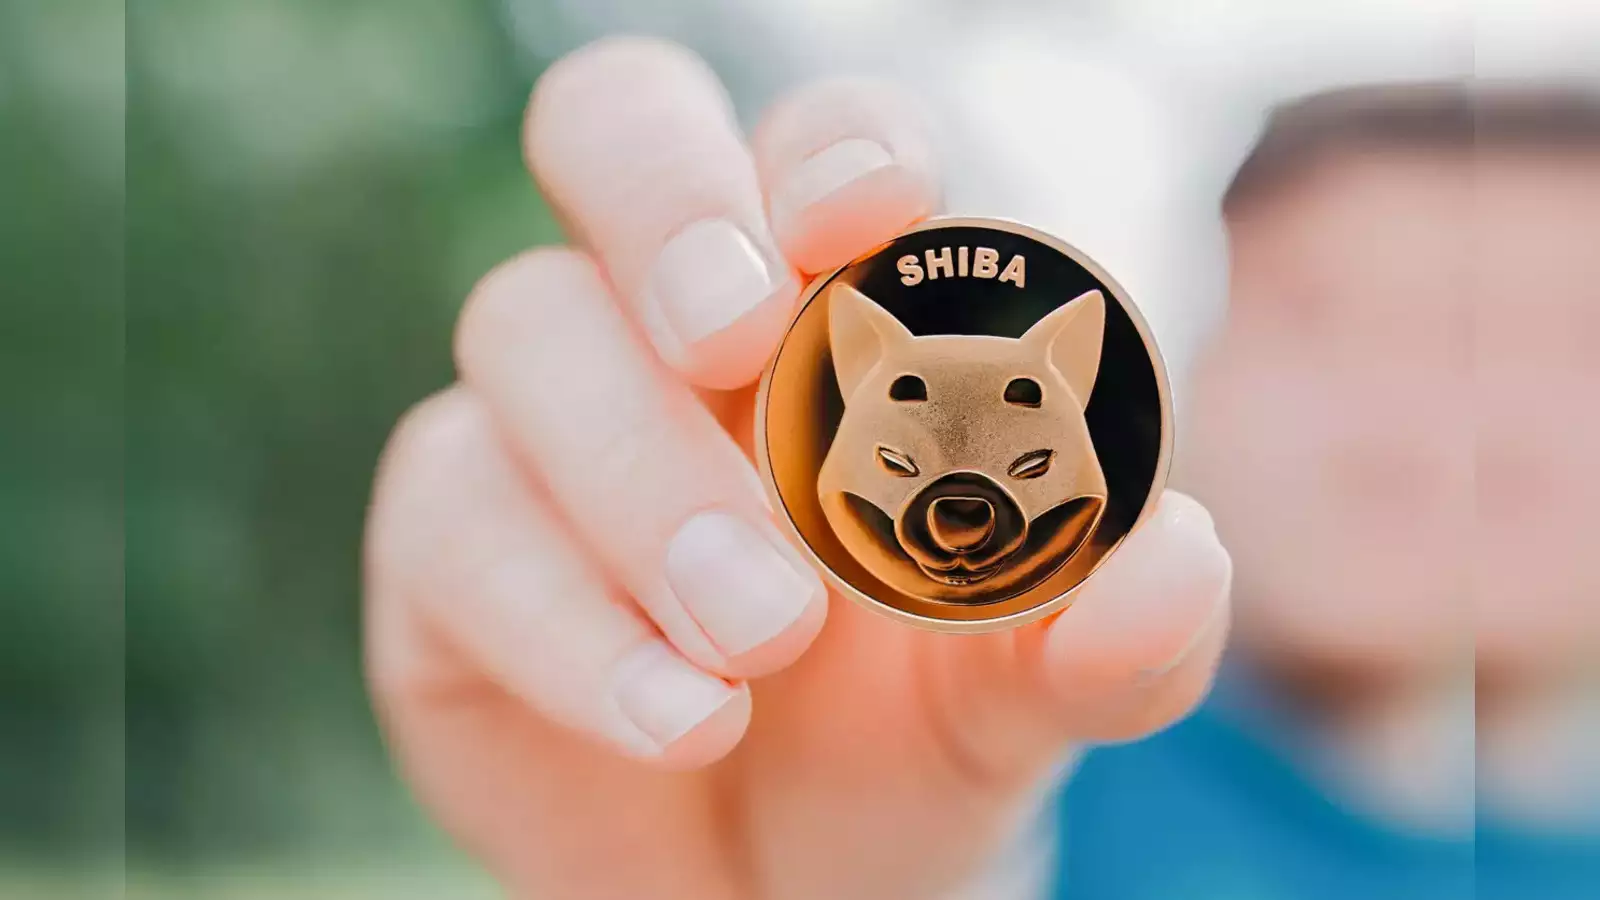 Woof! Shiba Inu Coin Crashes 11.56%, But is it Time to Buy the Dip or Run for the Hills?